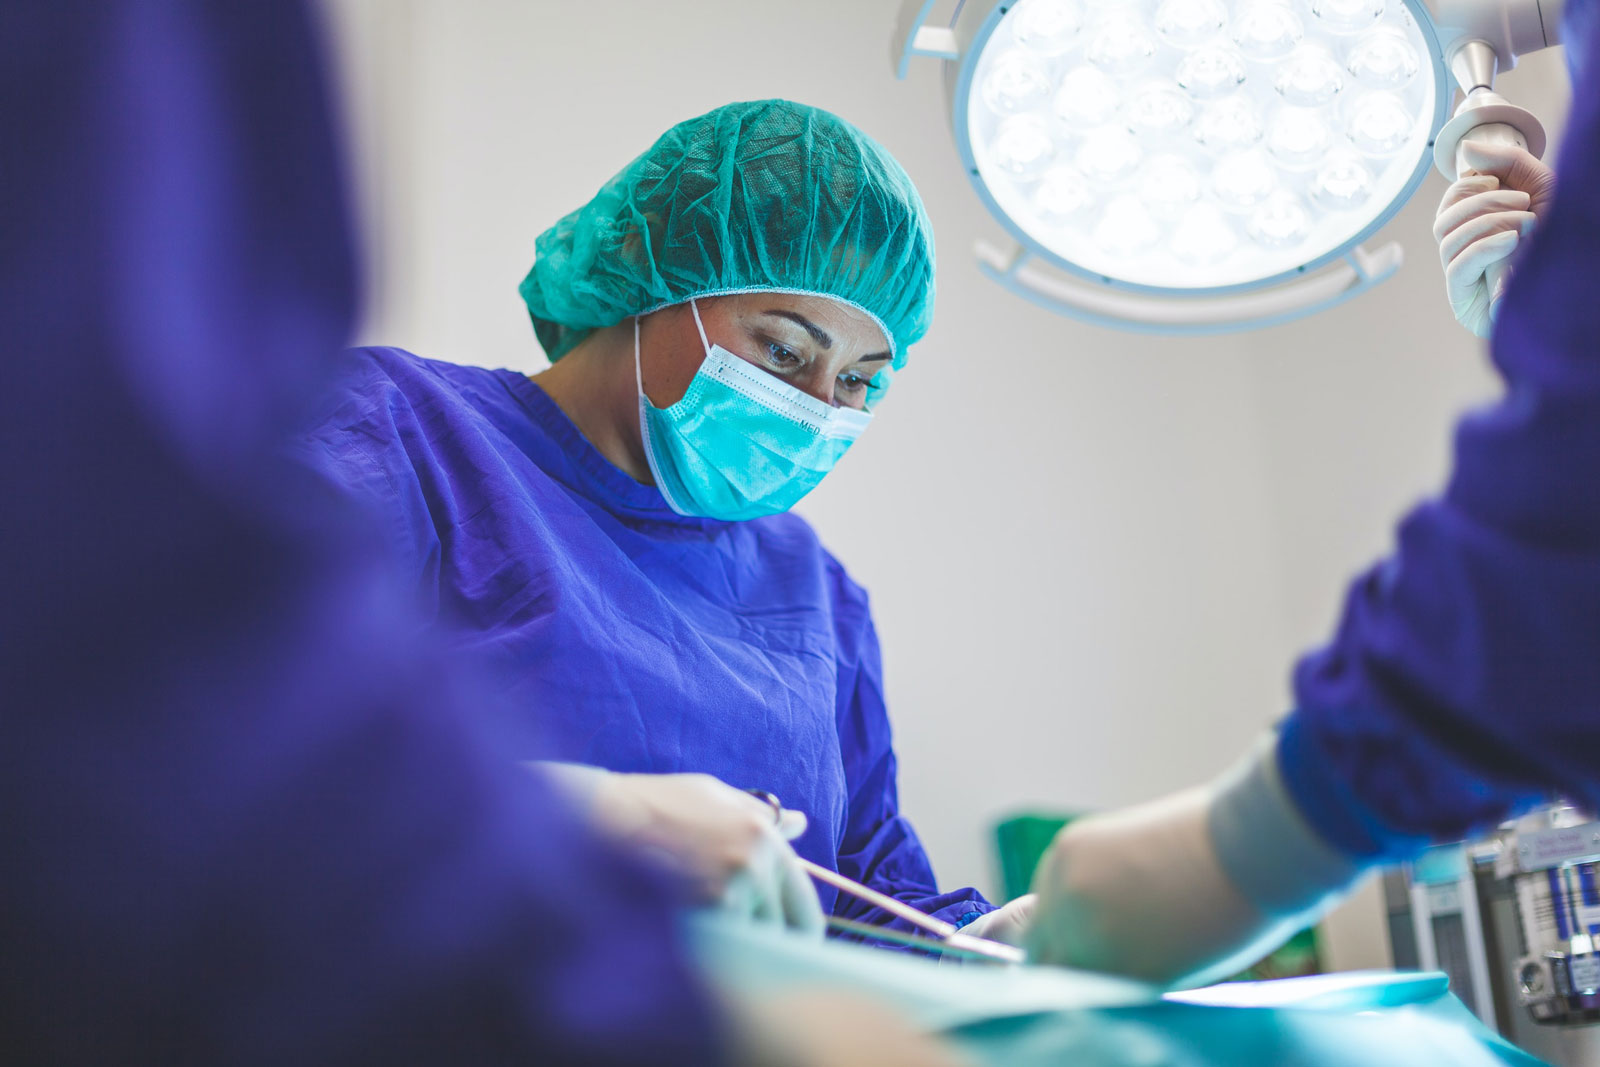 Healthcare worker in scrubs attending a surgery